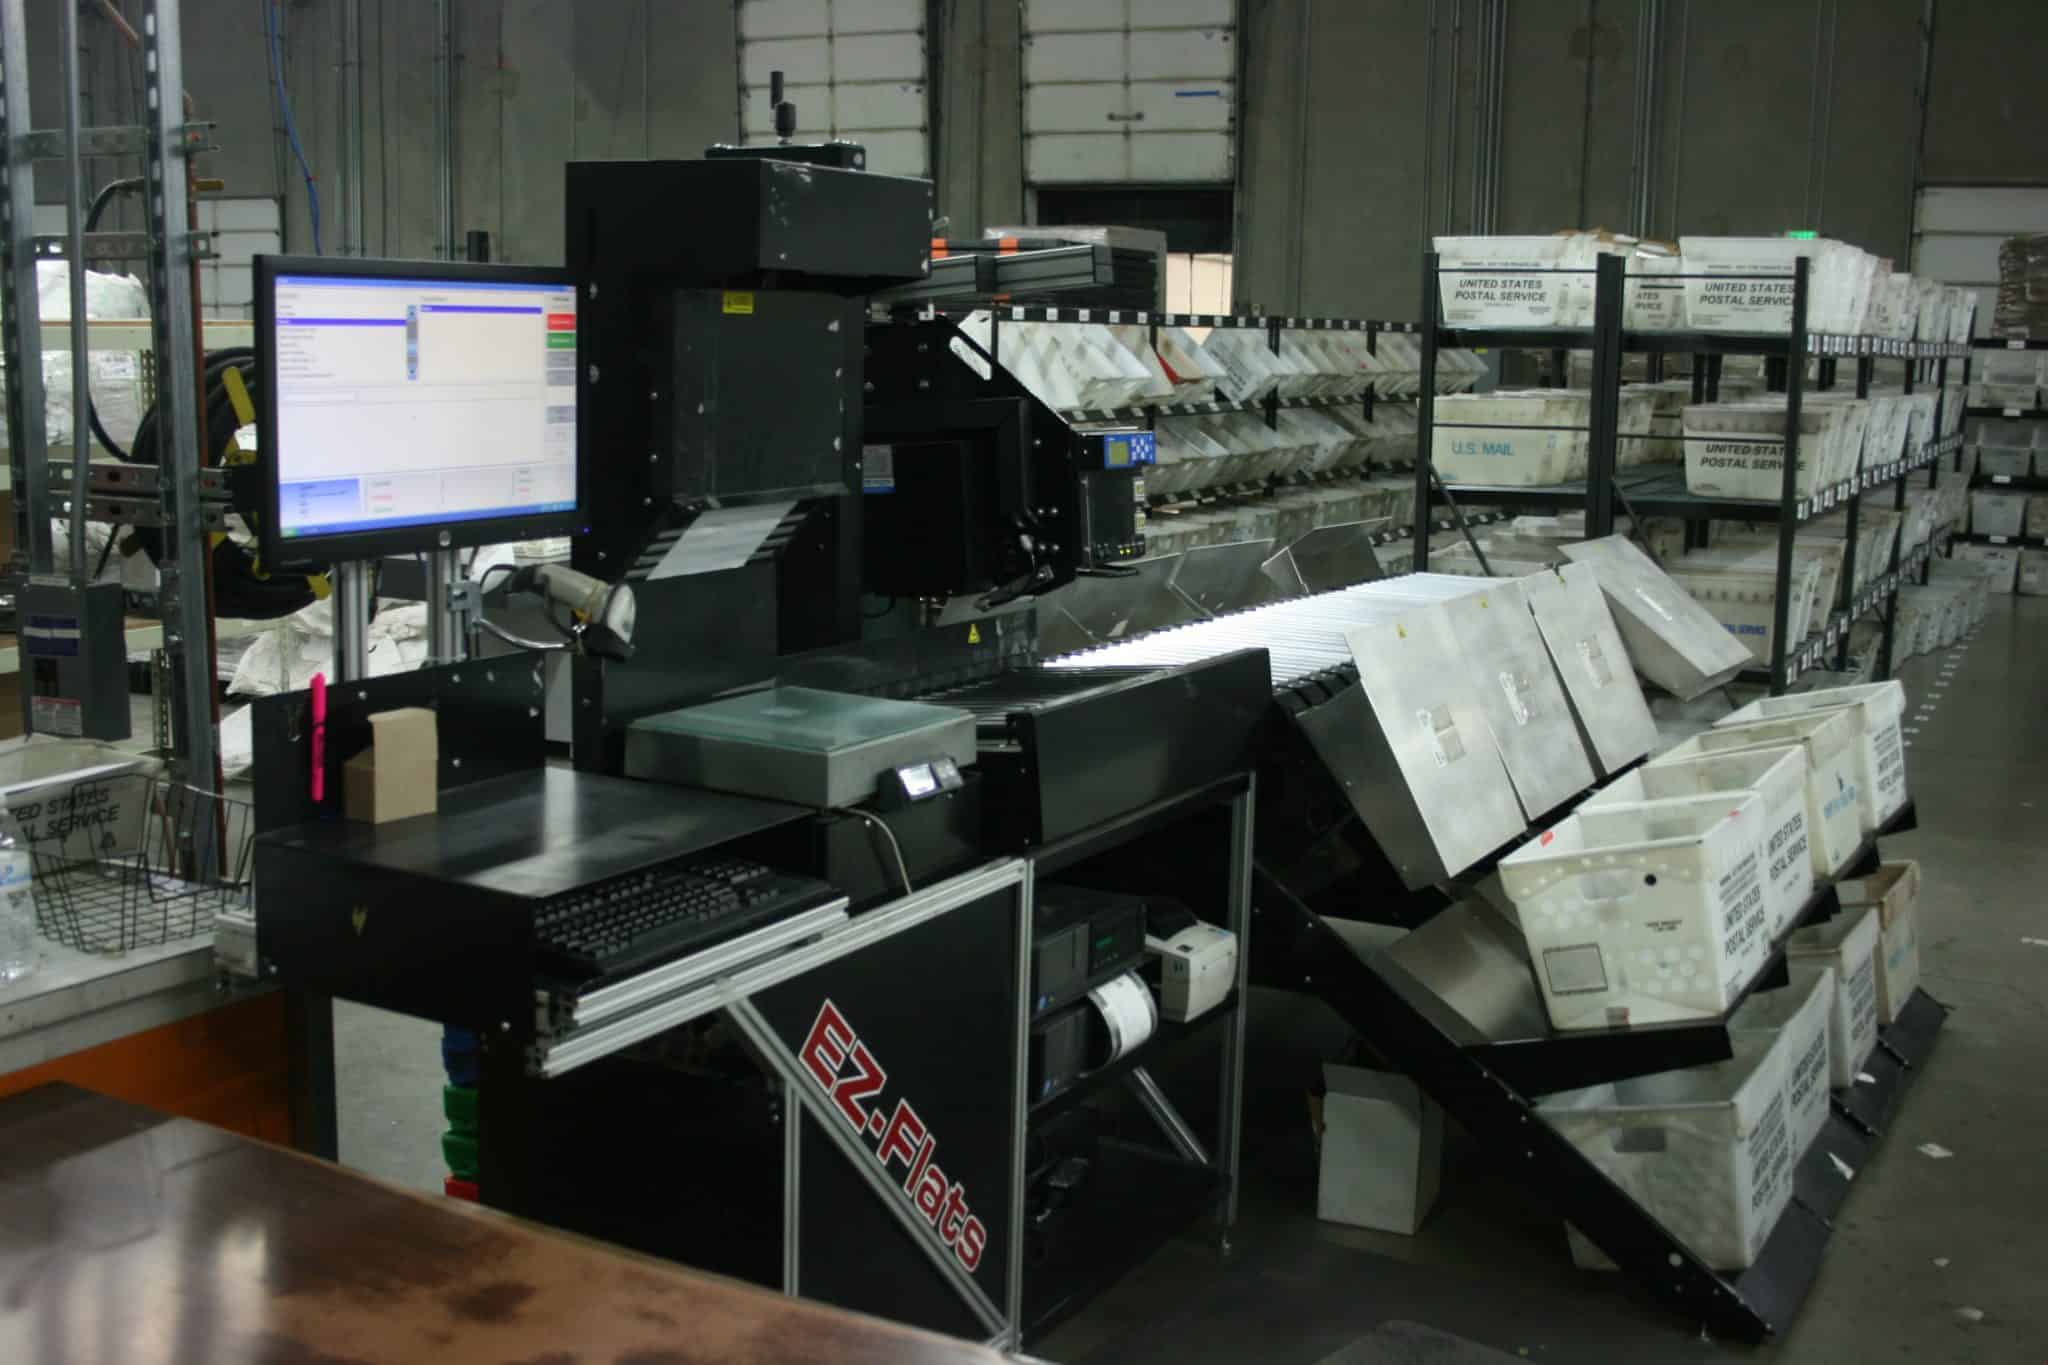 A front view of the EZ-flats sorter Skymail International uses.